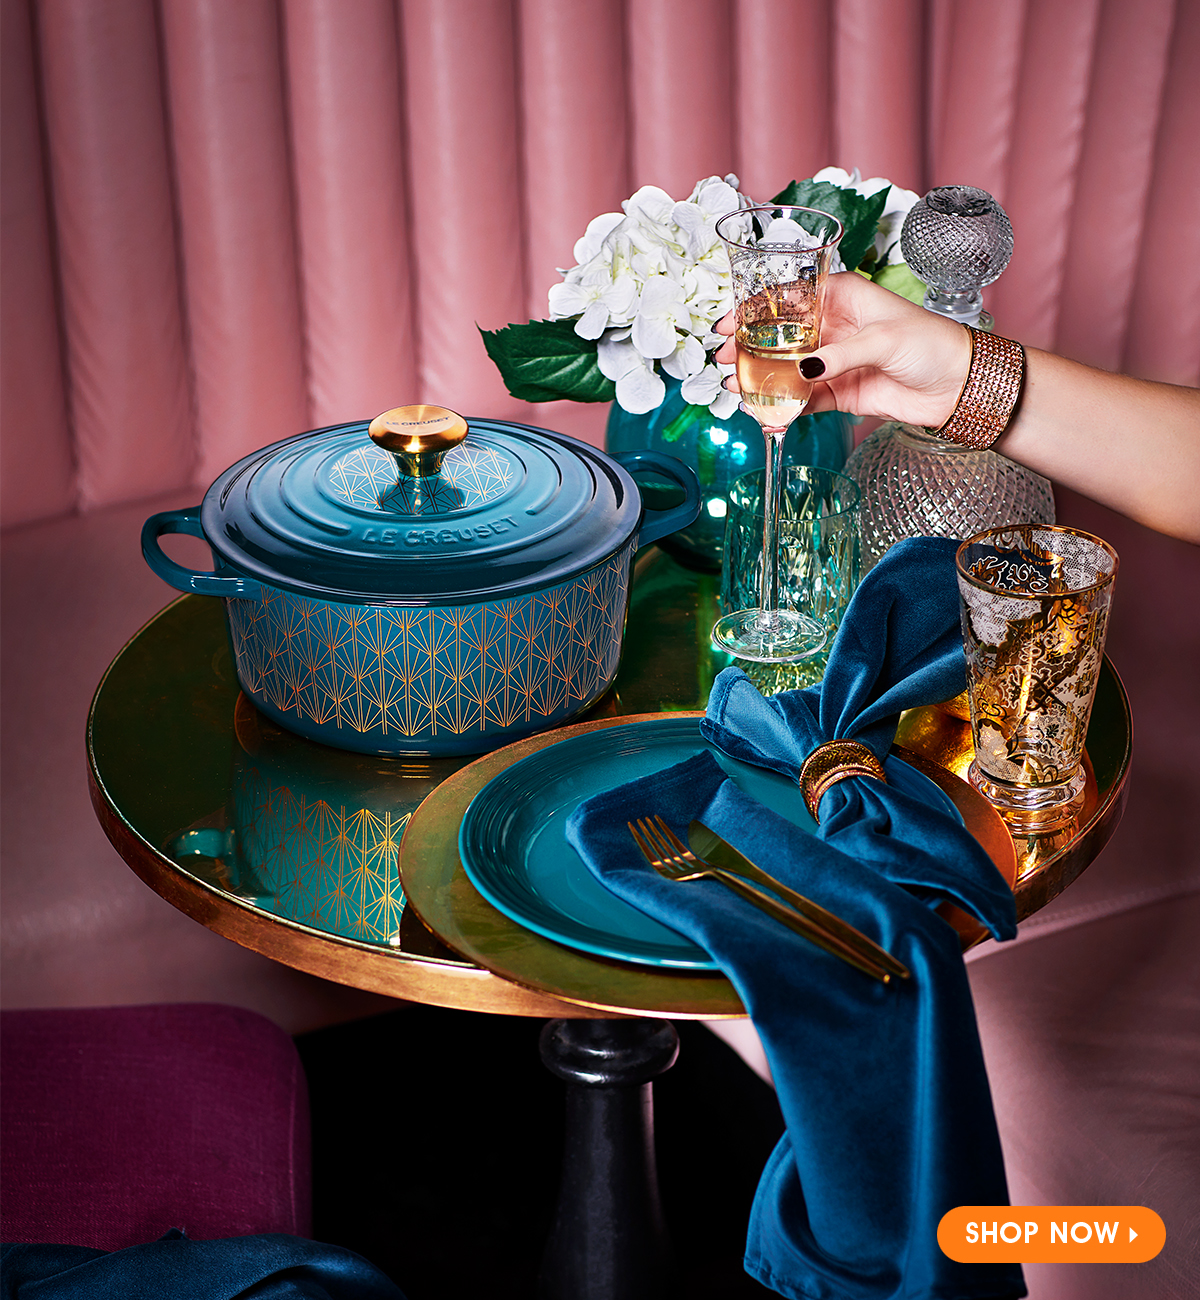 Le Creuset | in Style with NEW Soirée